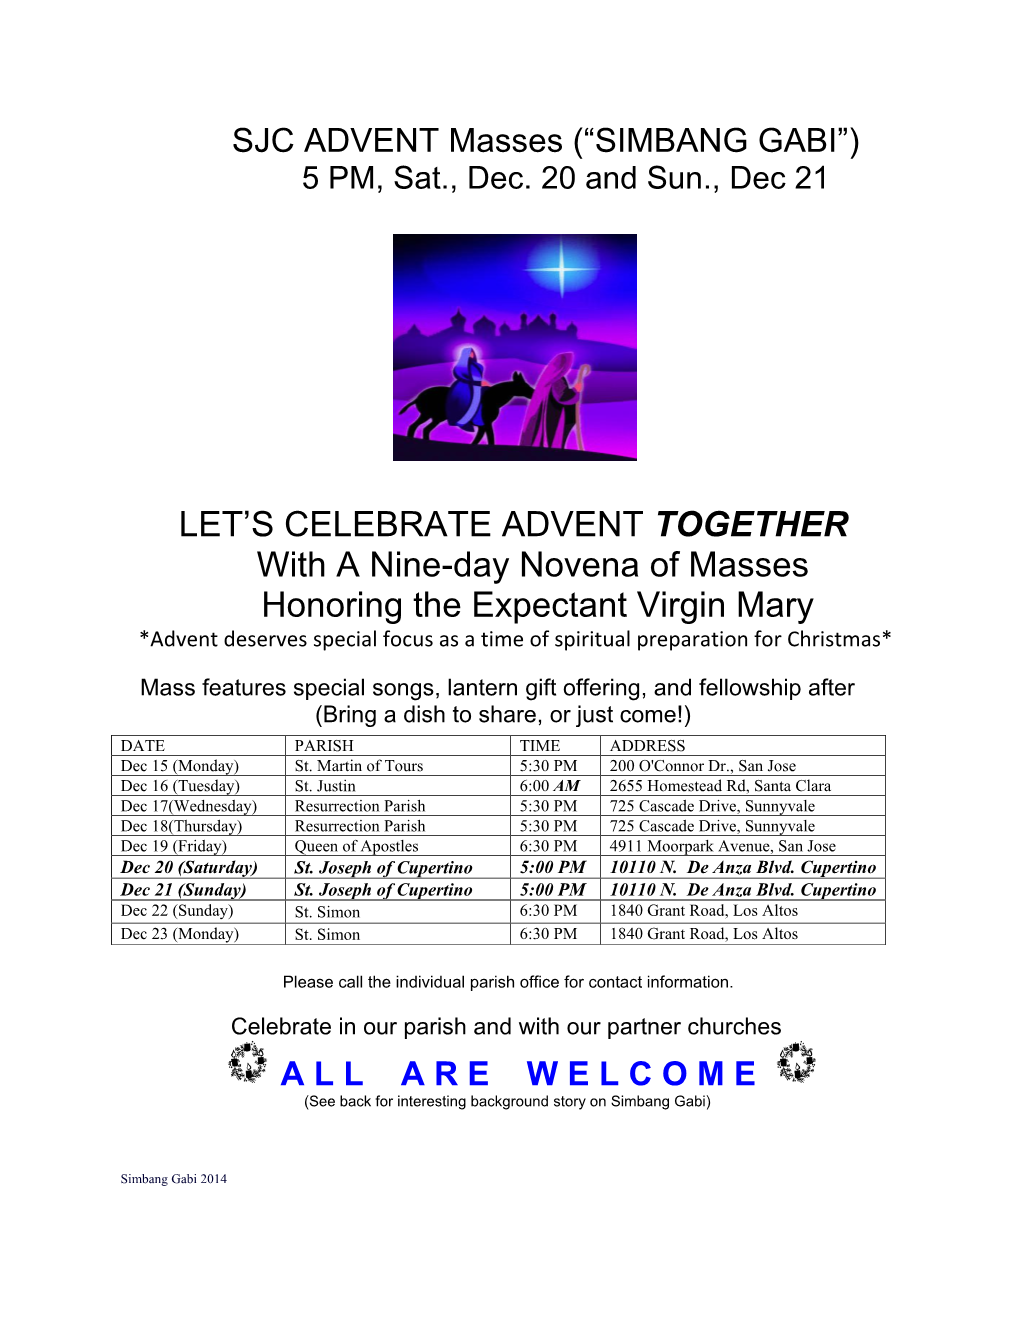 LET's CELEBRATE ADVENT TOGETHER with a Nine-Day